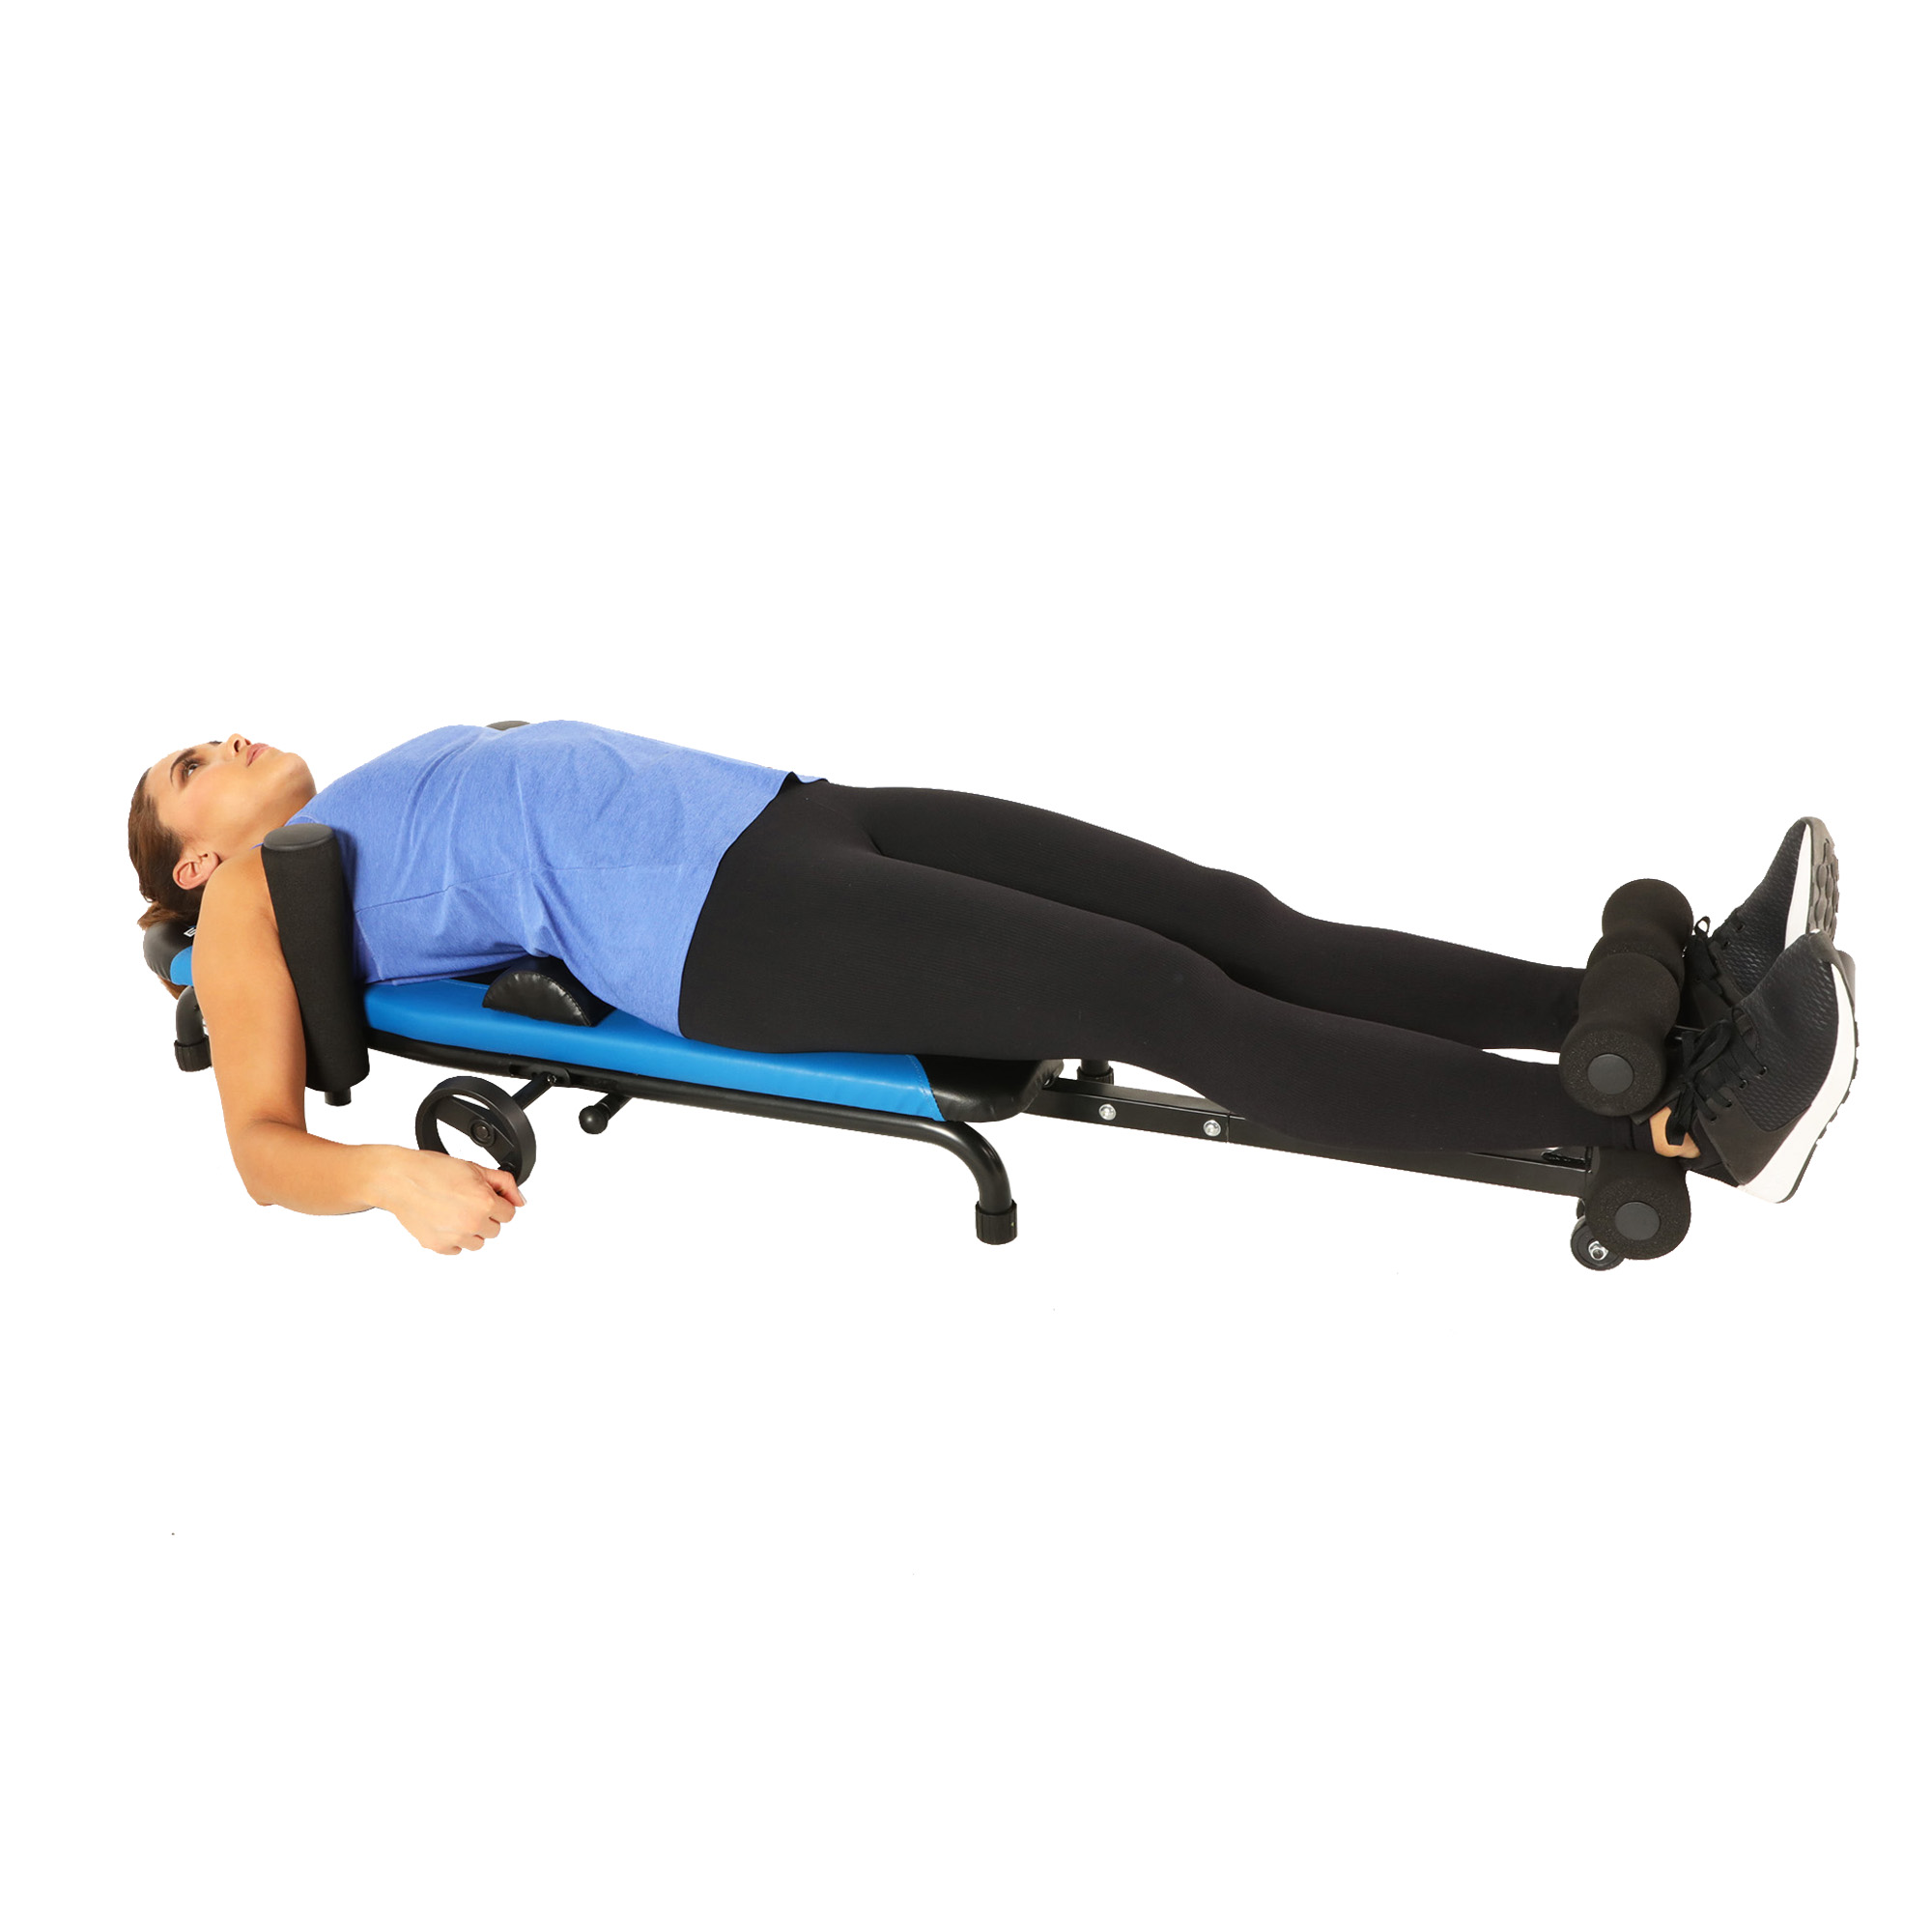 Exerpeutic 100 Back Stretch Traction Table Inversion Alternative with 300 Lbs. Weight Capacity - image 5 of 6